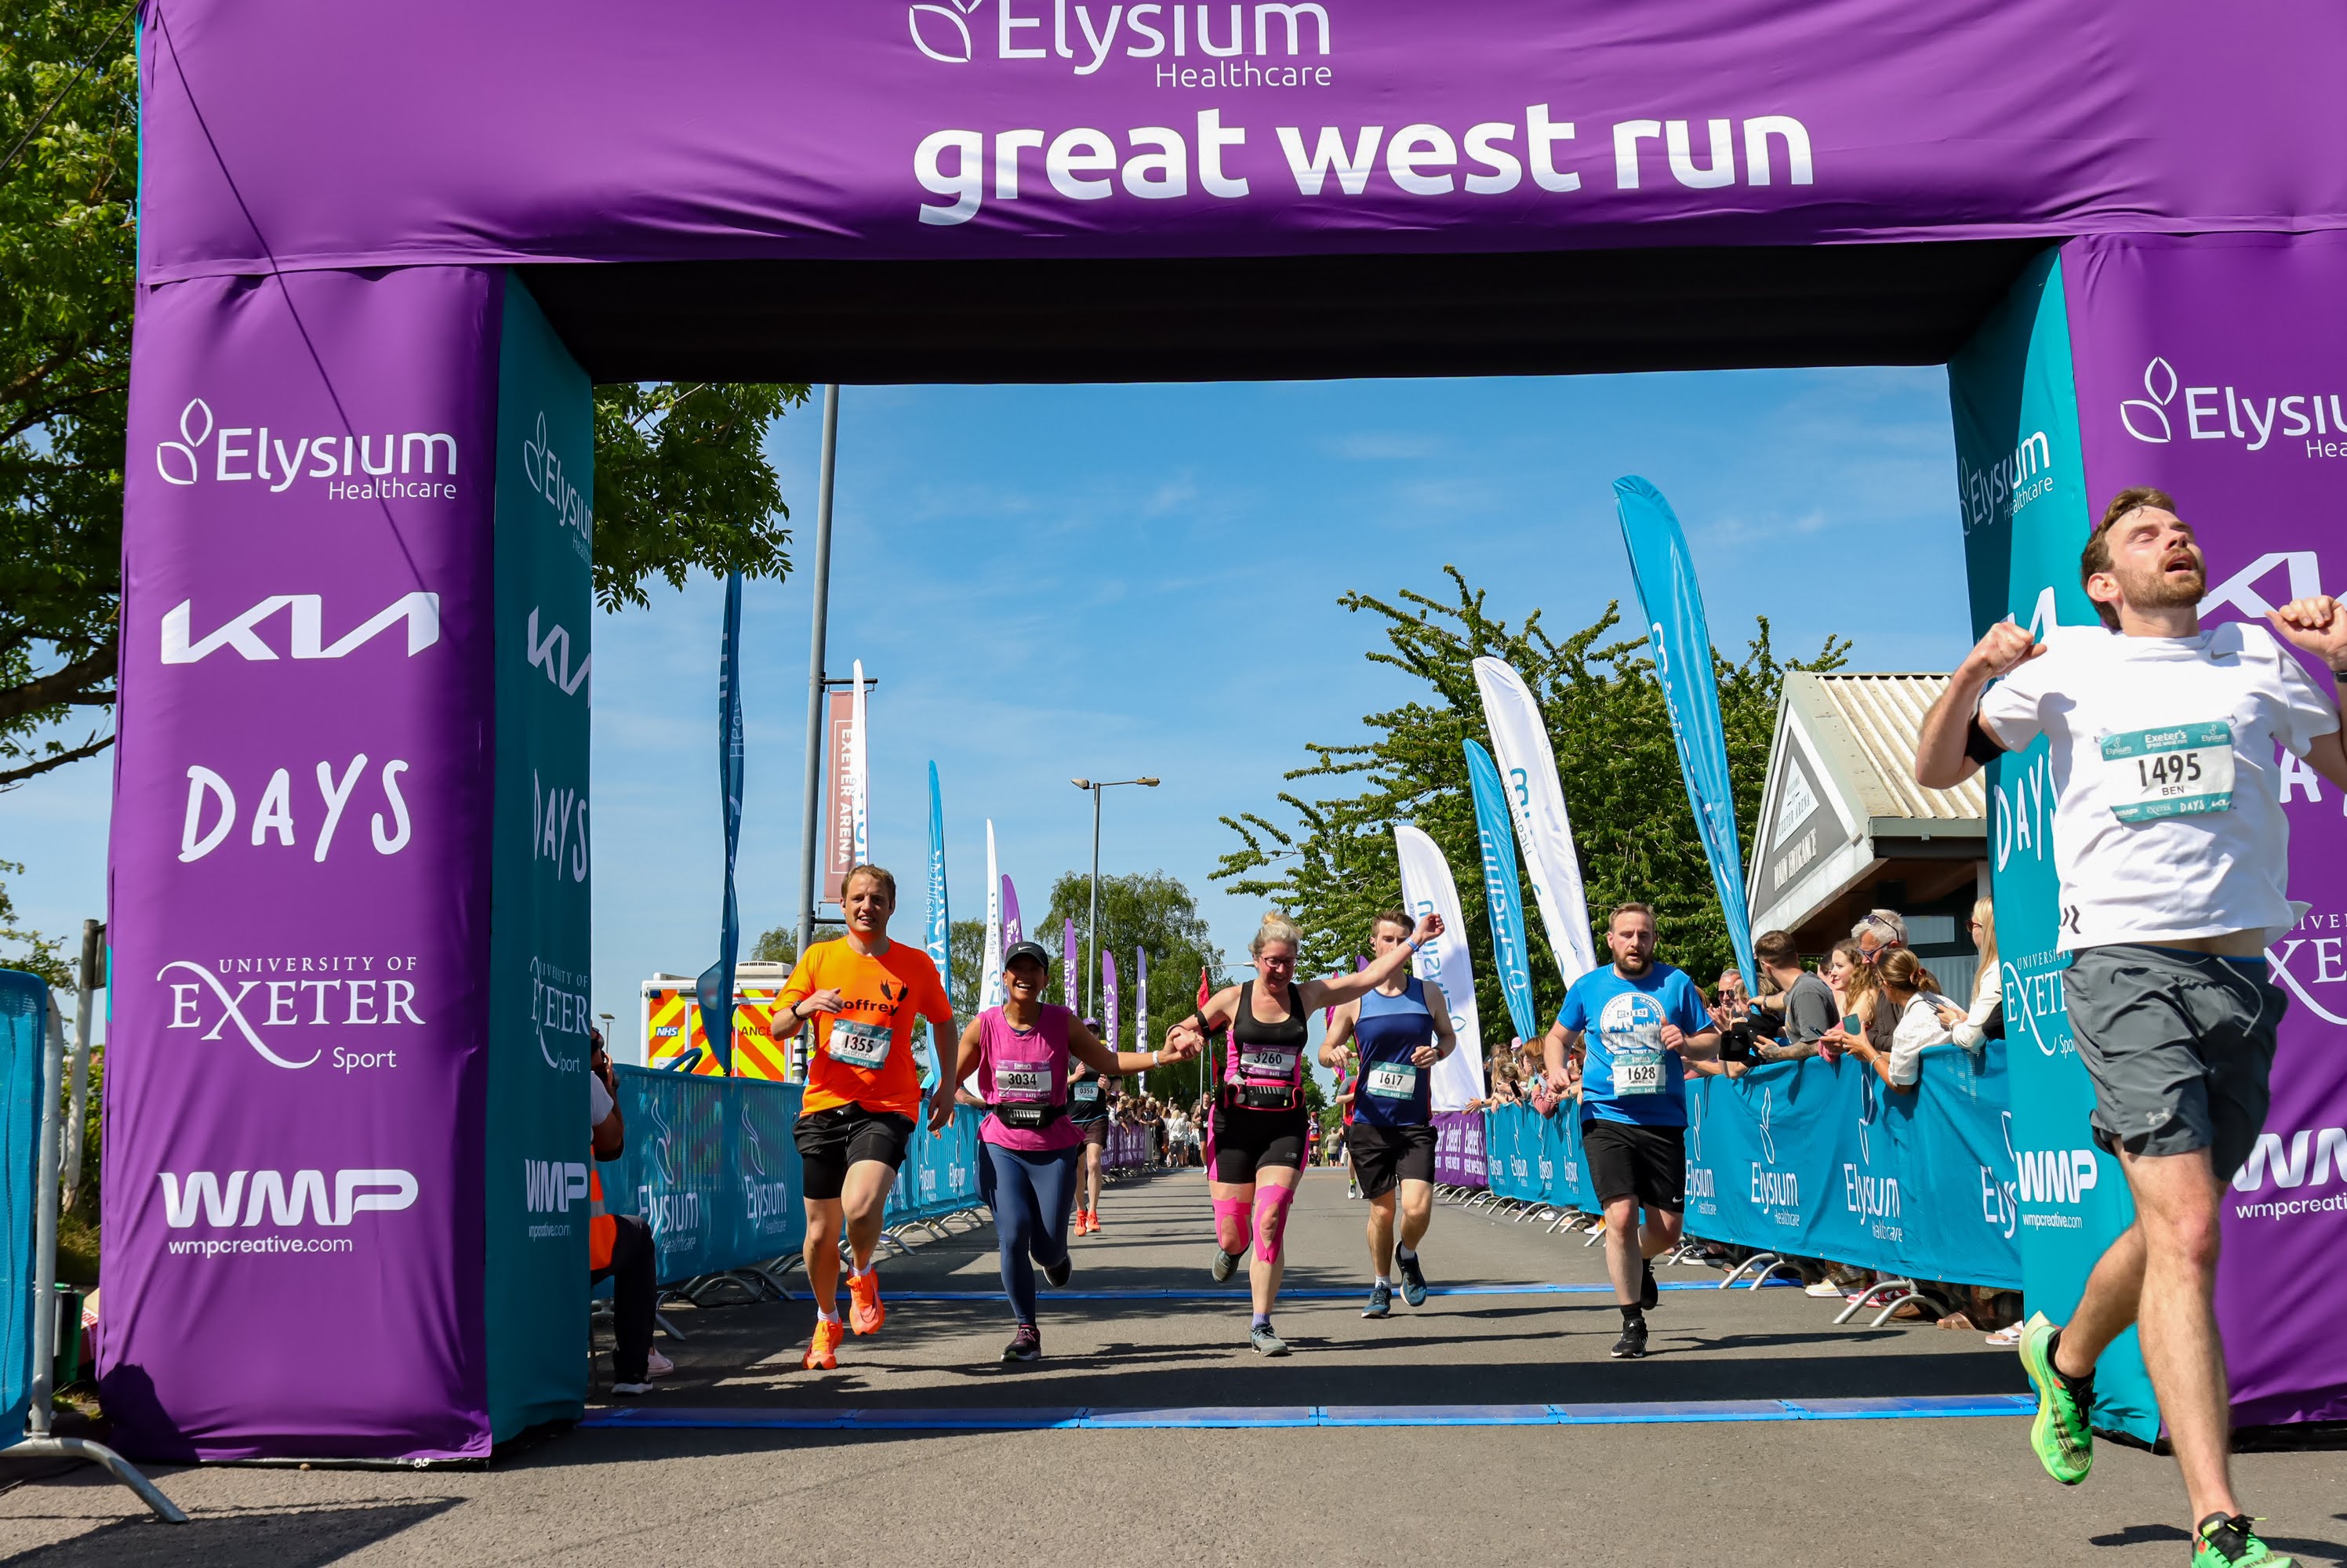 Geoffrey Hayward crossing the finish line at the Exeter Great West Run.